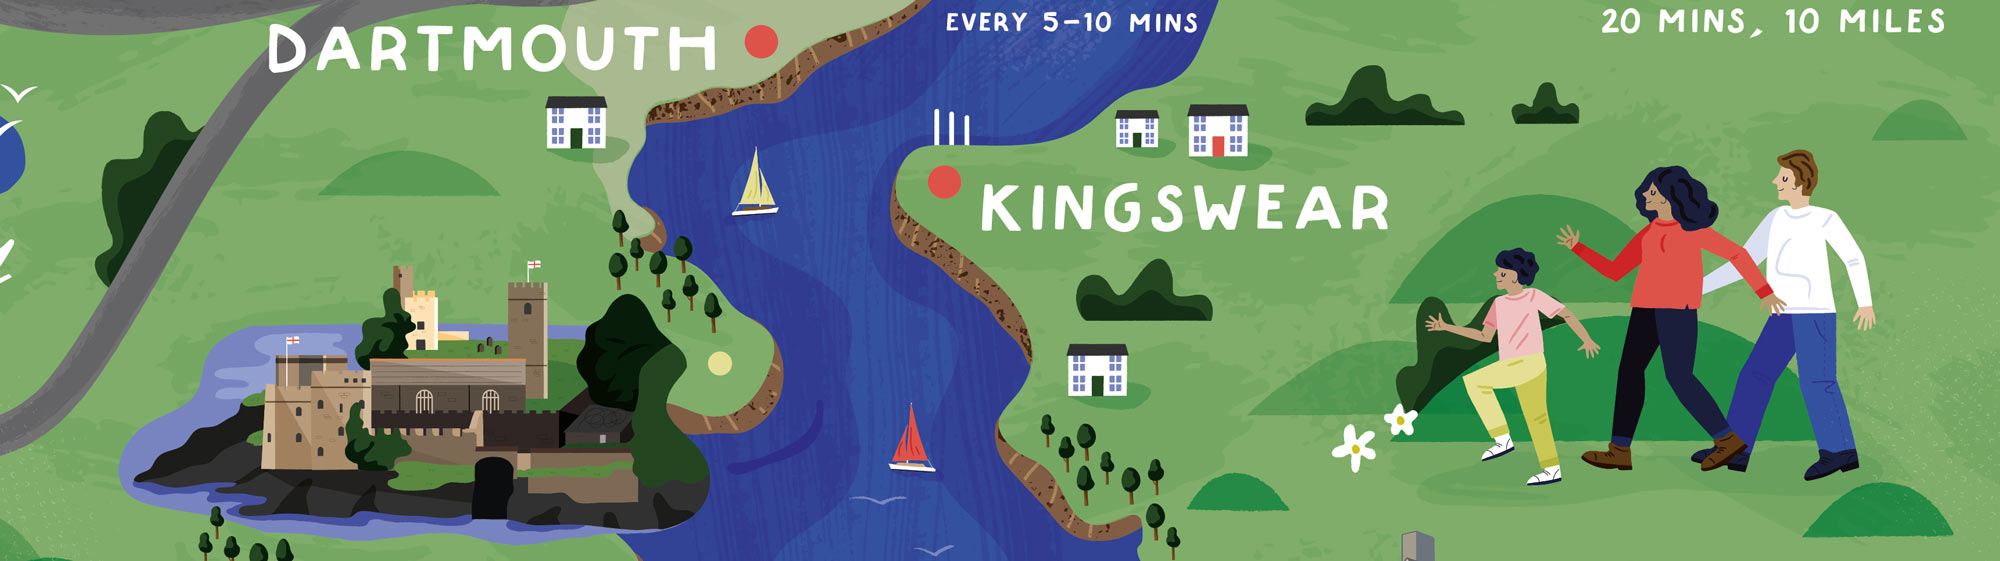 A section of the Dartmouth map I made for Dartmouth Higher Ferry by Elly Jahnz